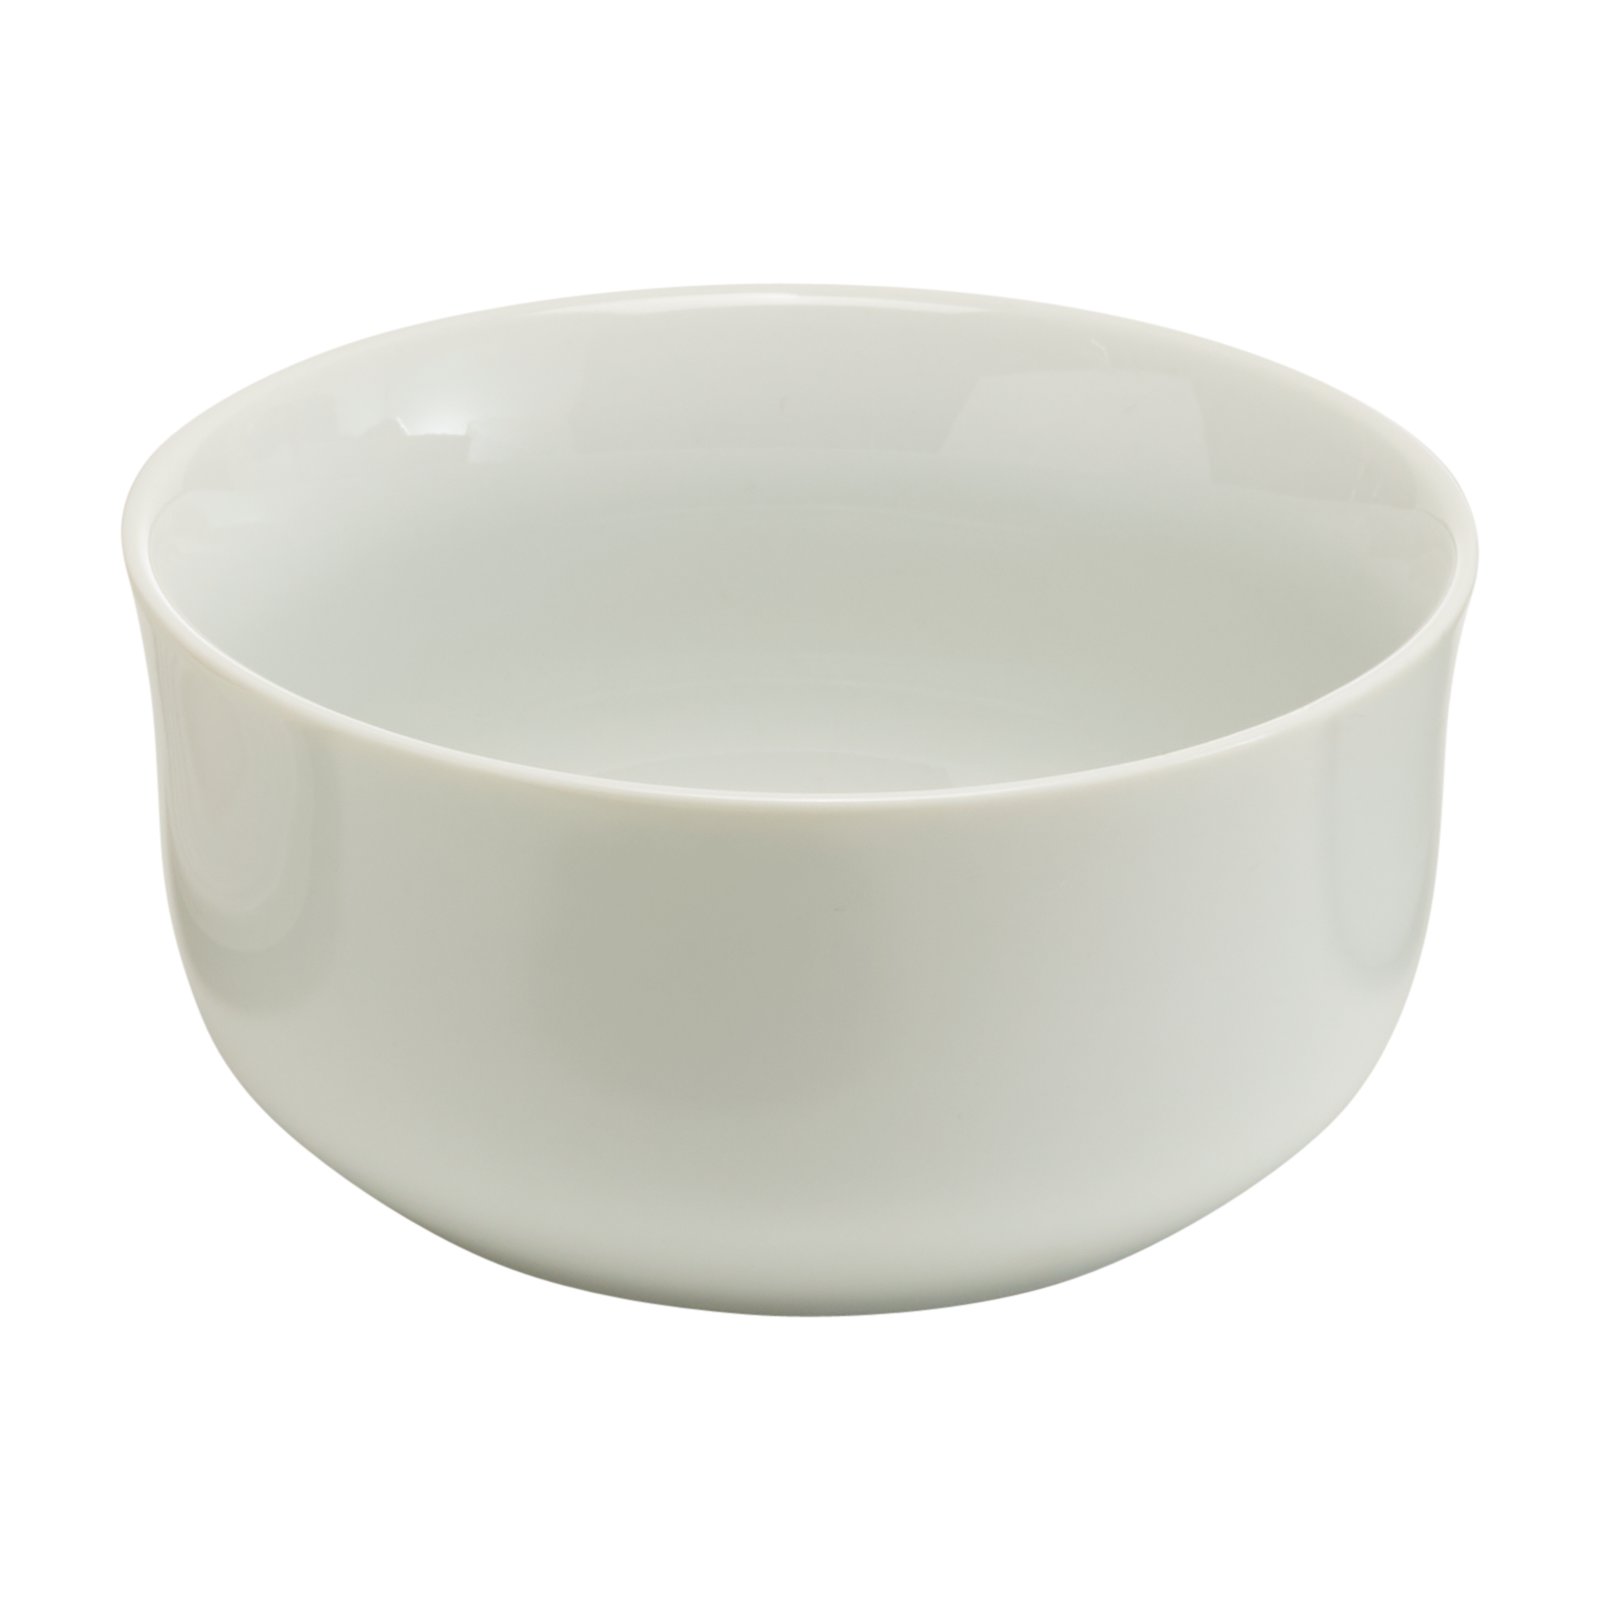 Dinex DuraTherm™ Onyx Insulated Soup Bowl Lid - 5 1/5Dia x 1 1/2H